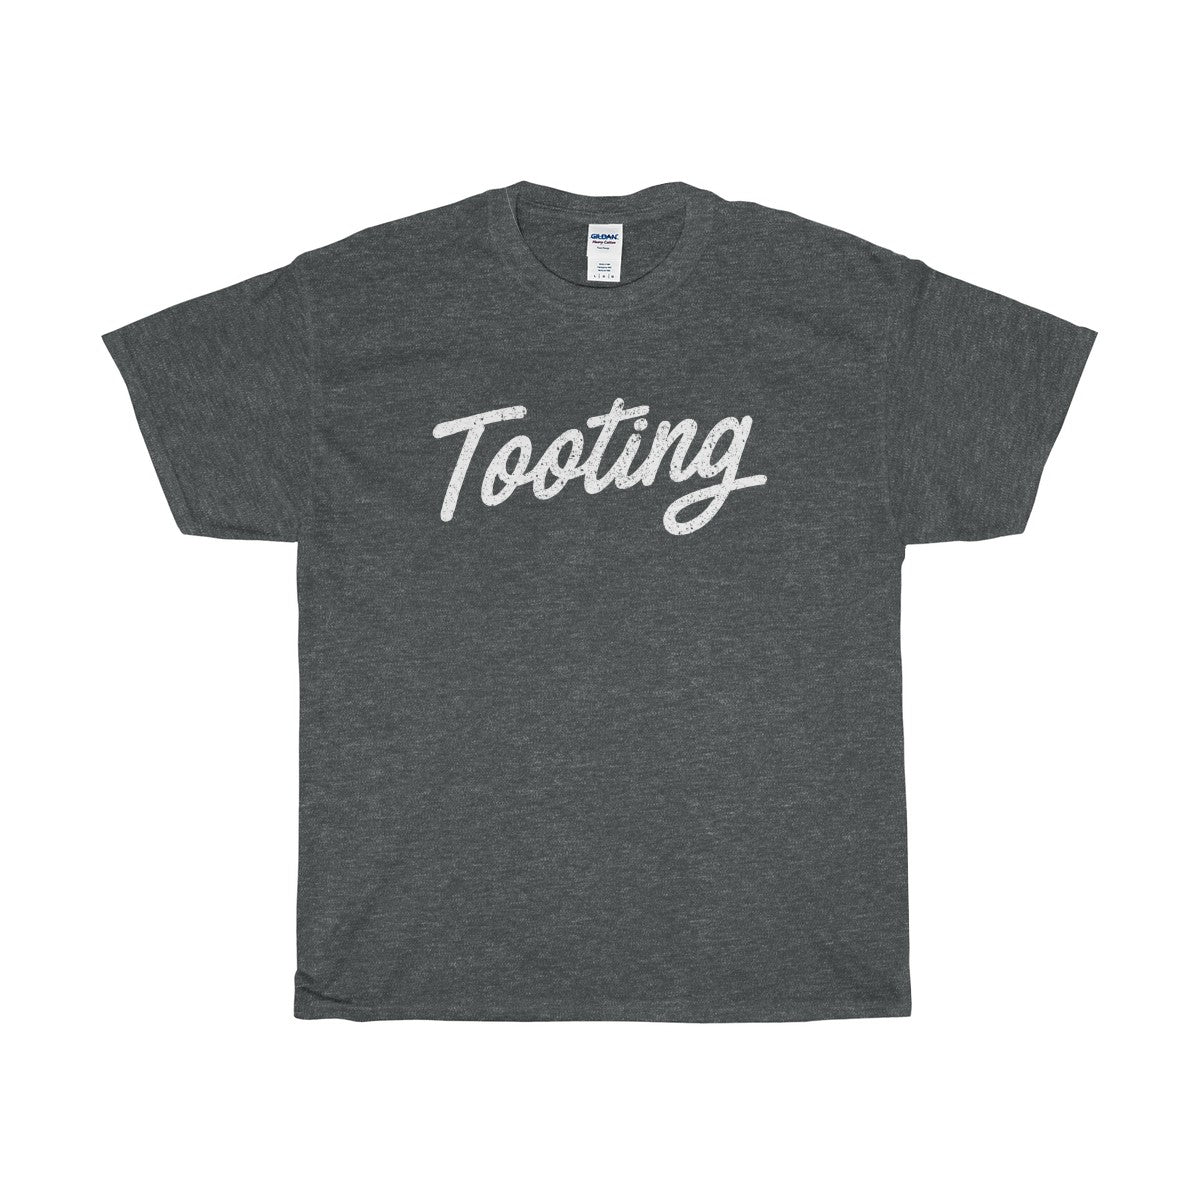 Tooting Scripted T-Shirt